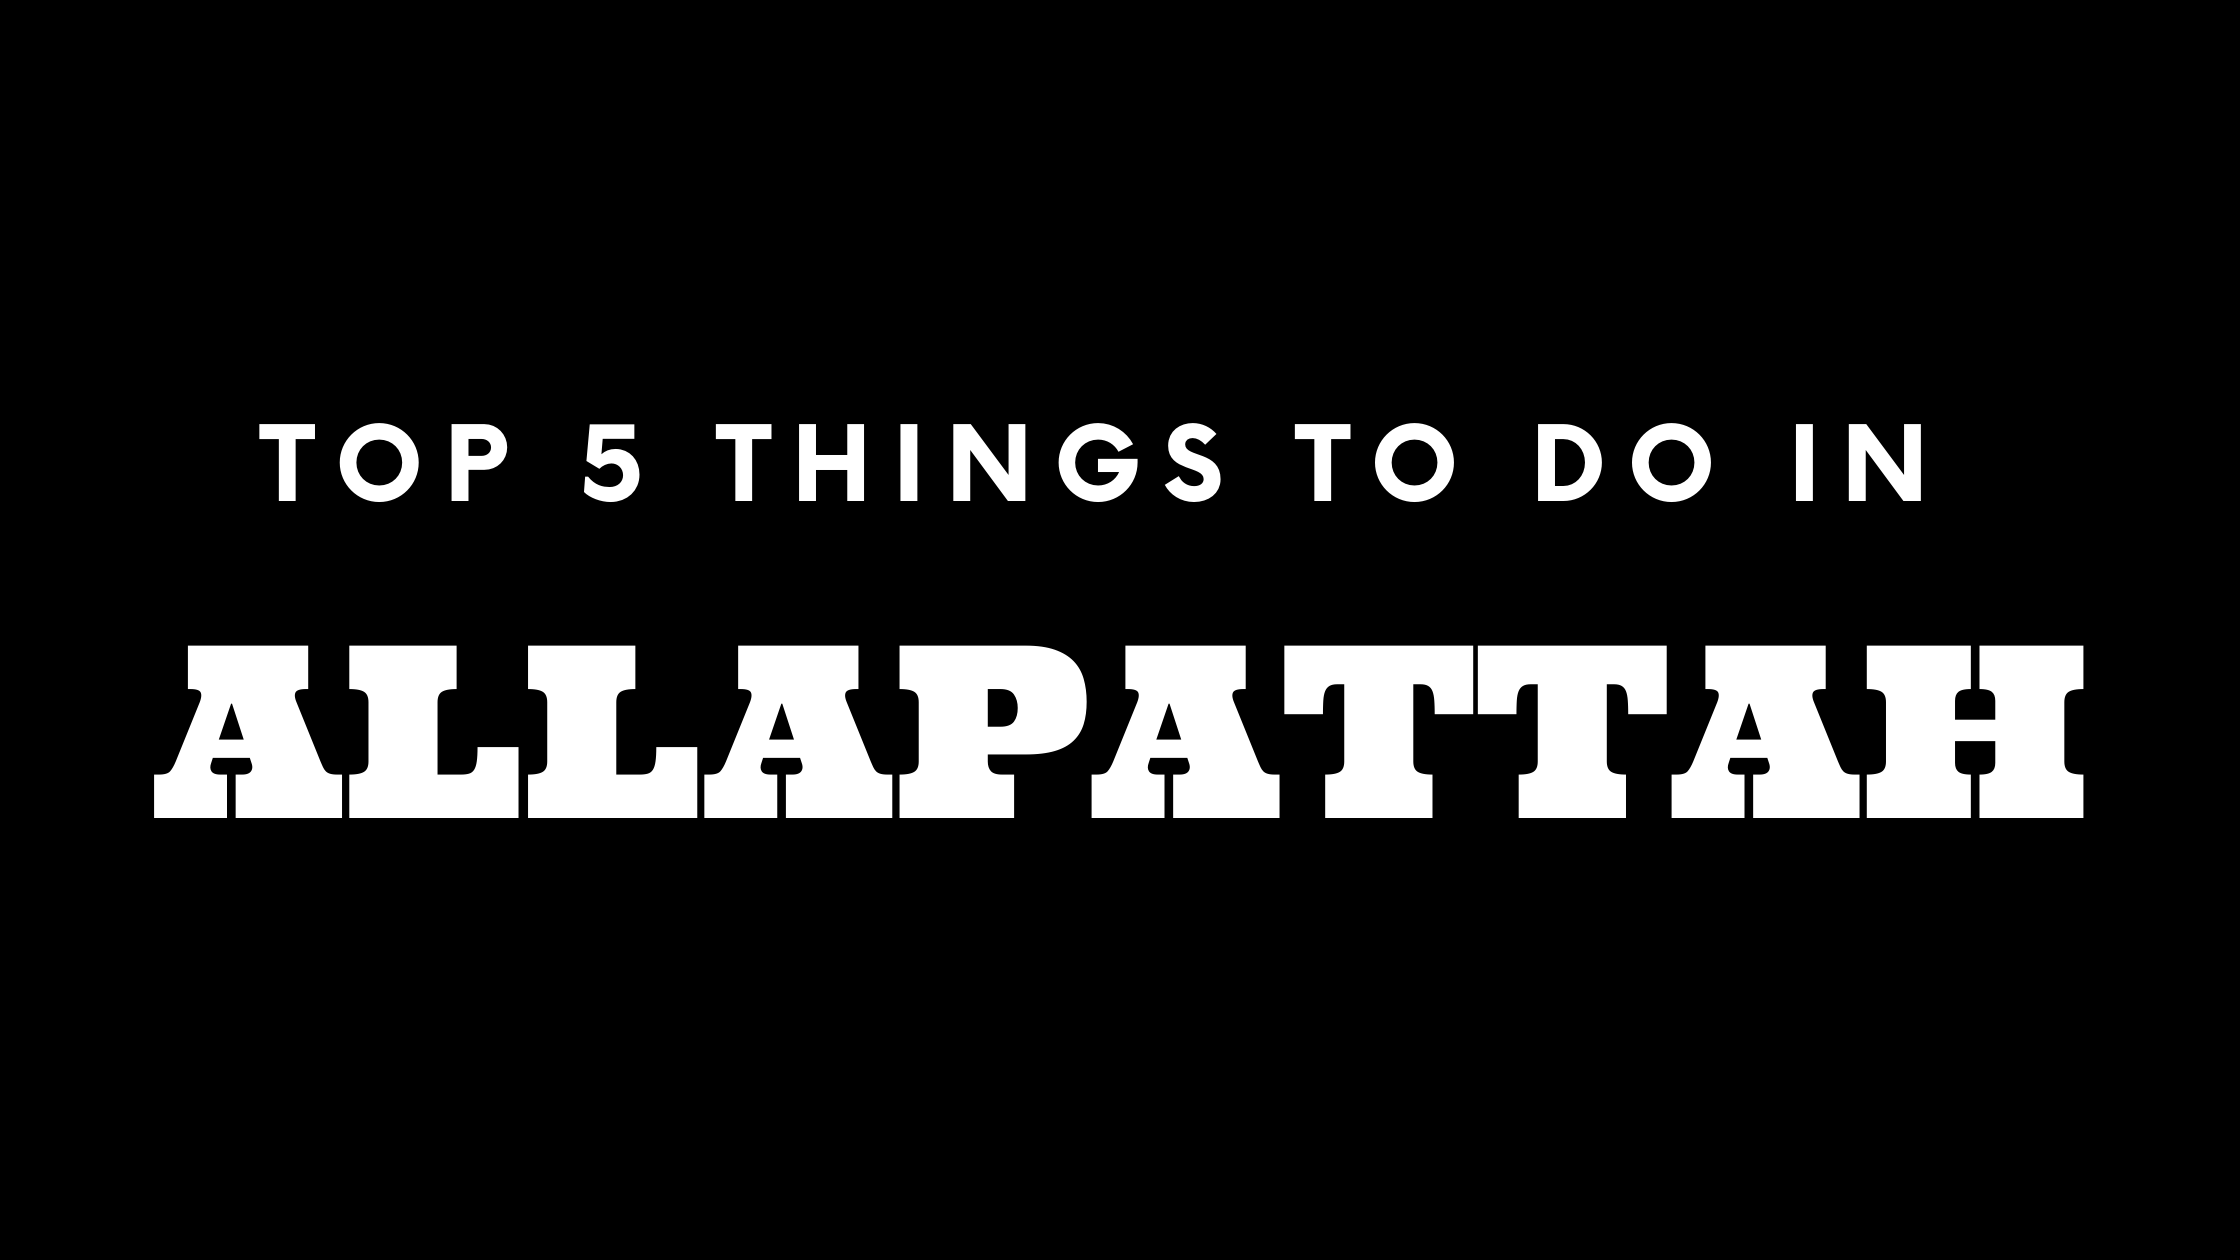 Top 5 Things To Do in Allapattah